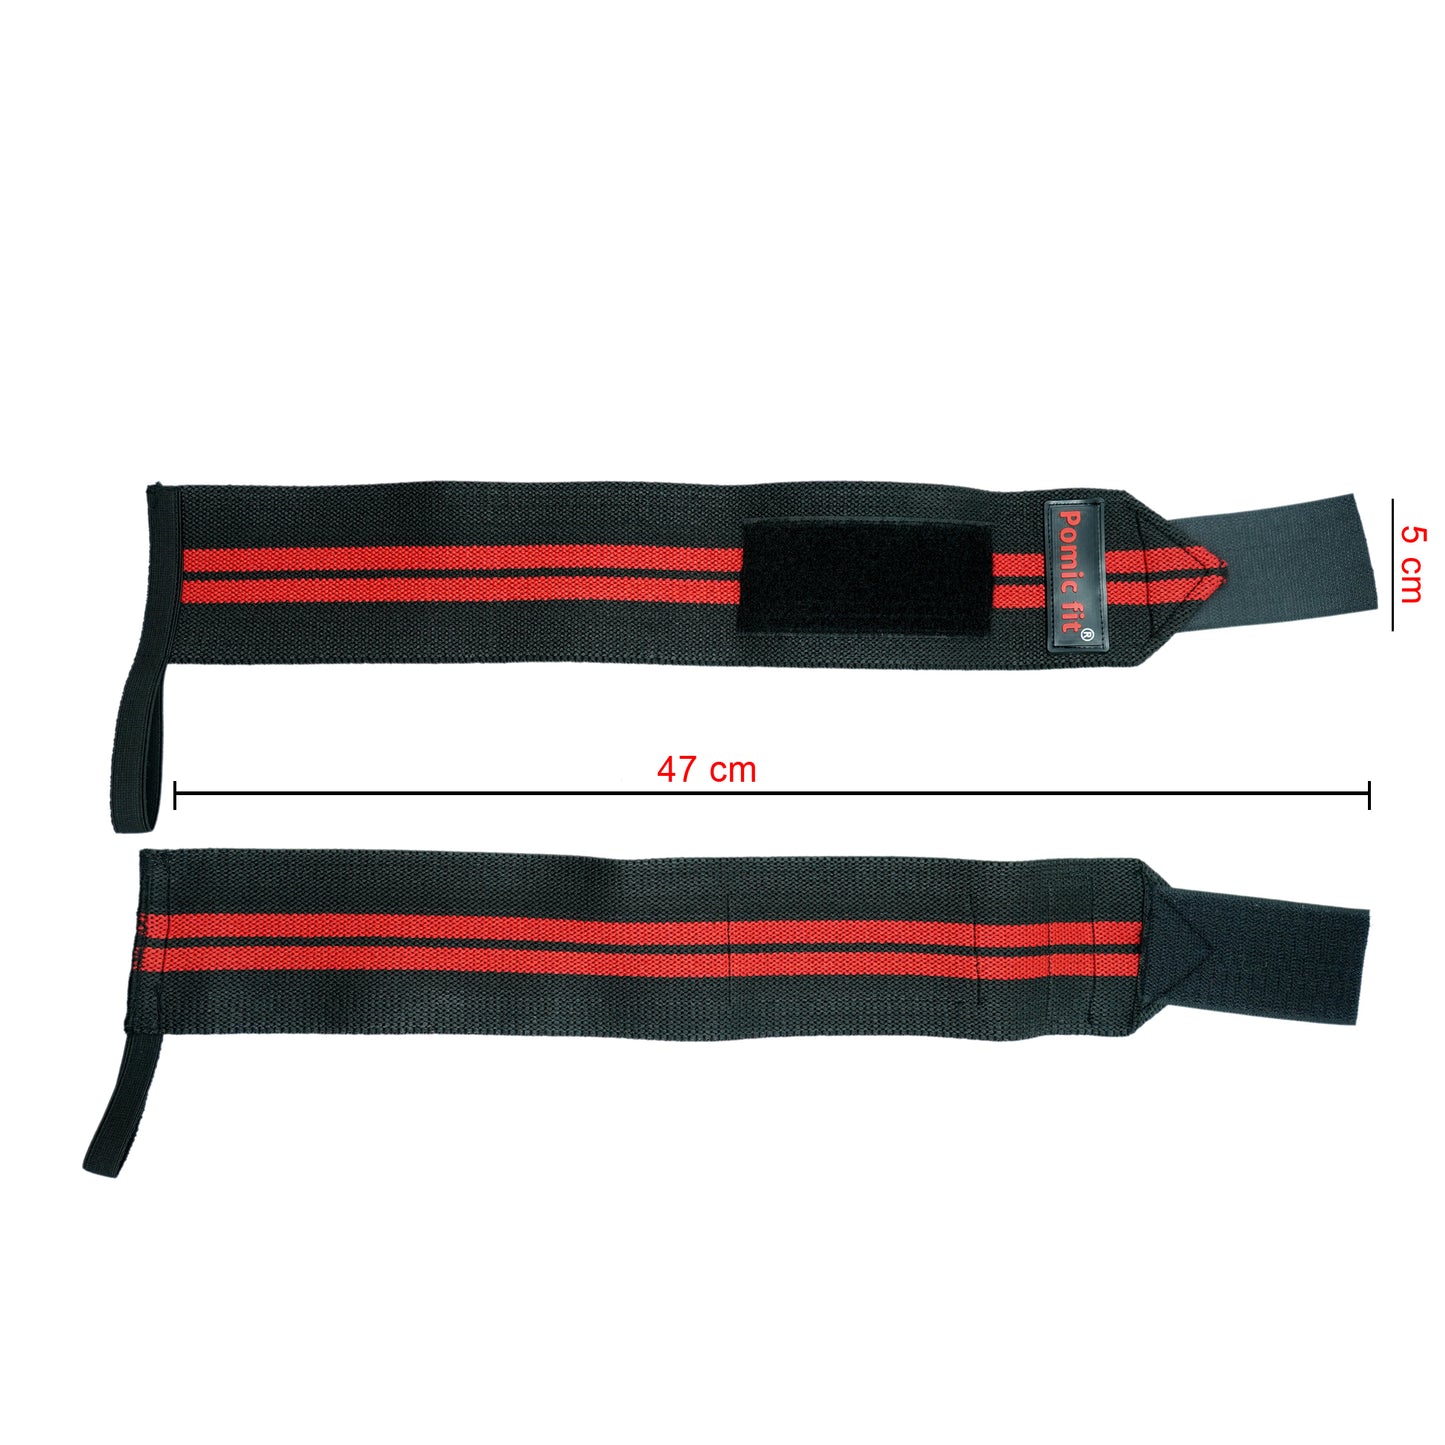 Wrist Support Gym Band Strap Black & Red